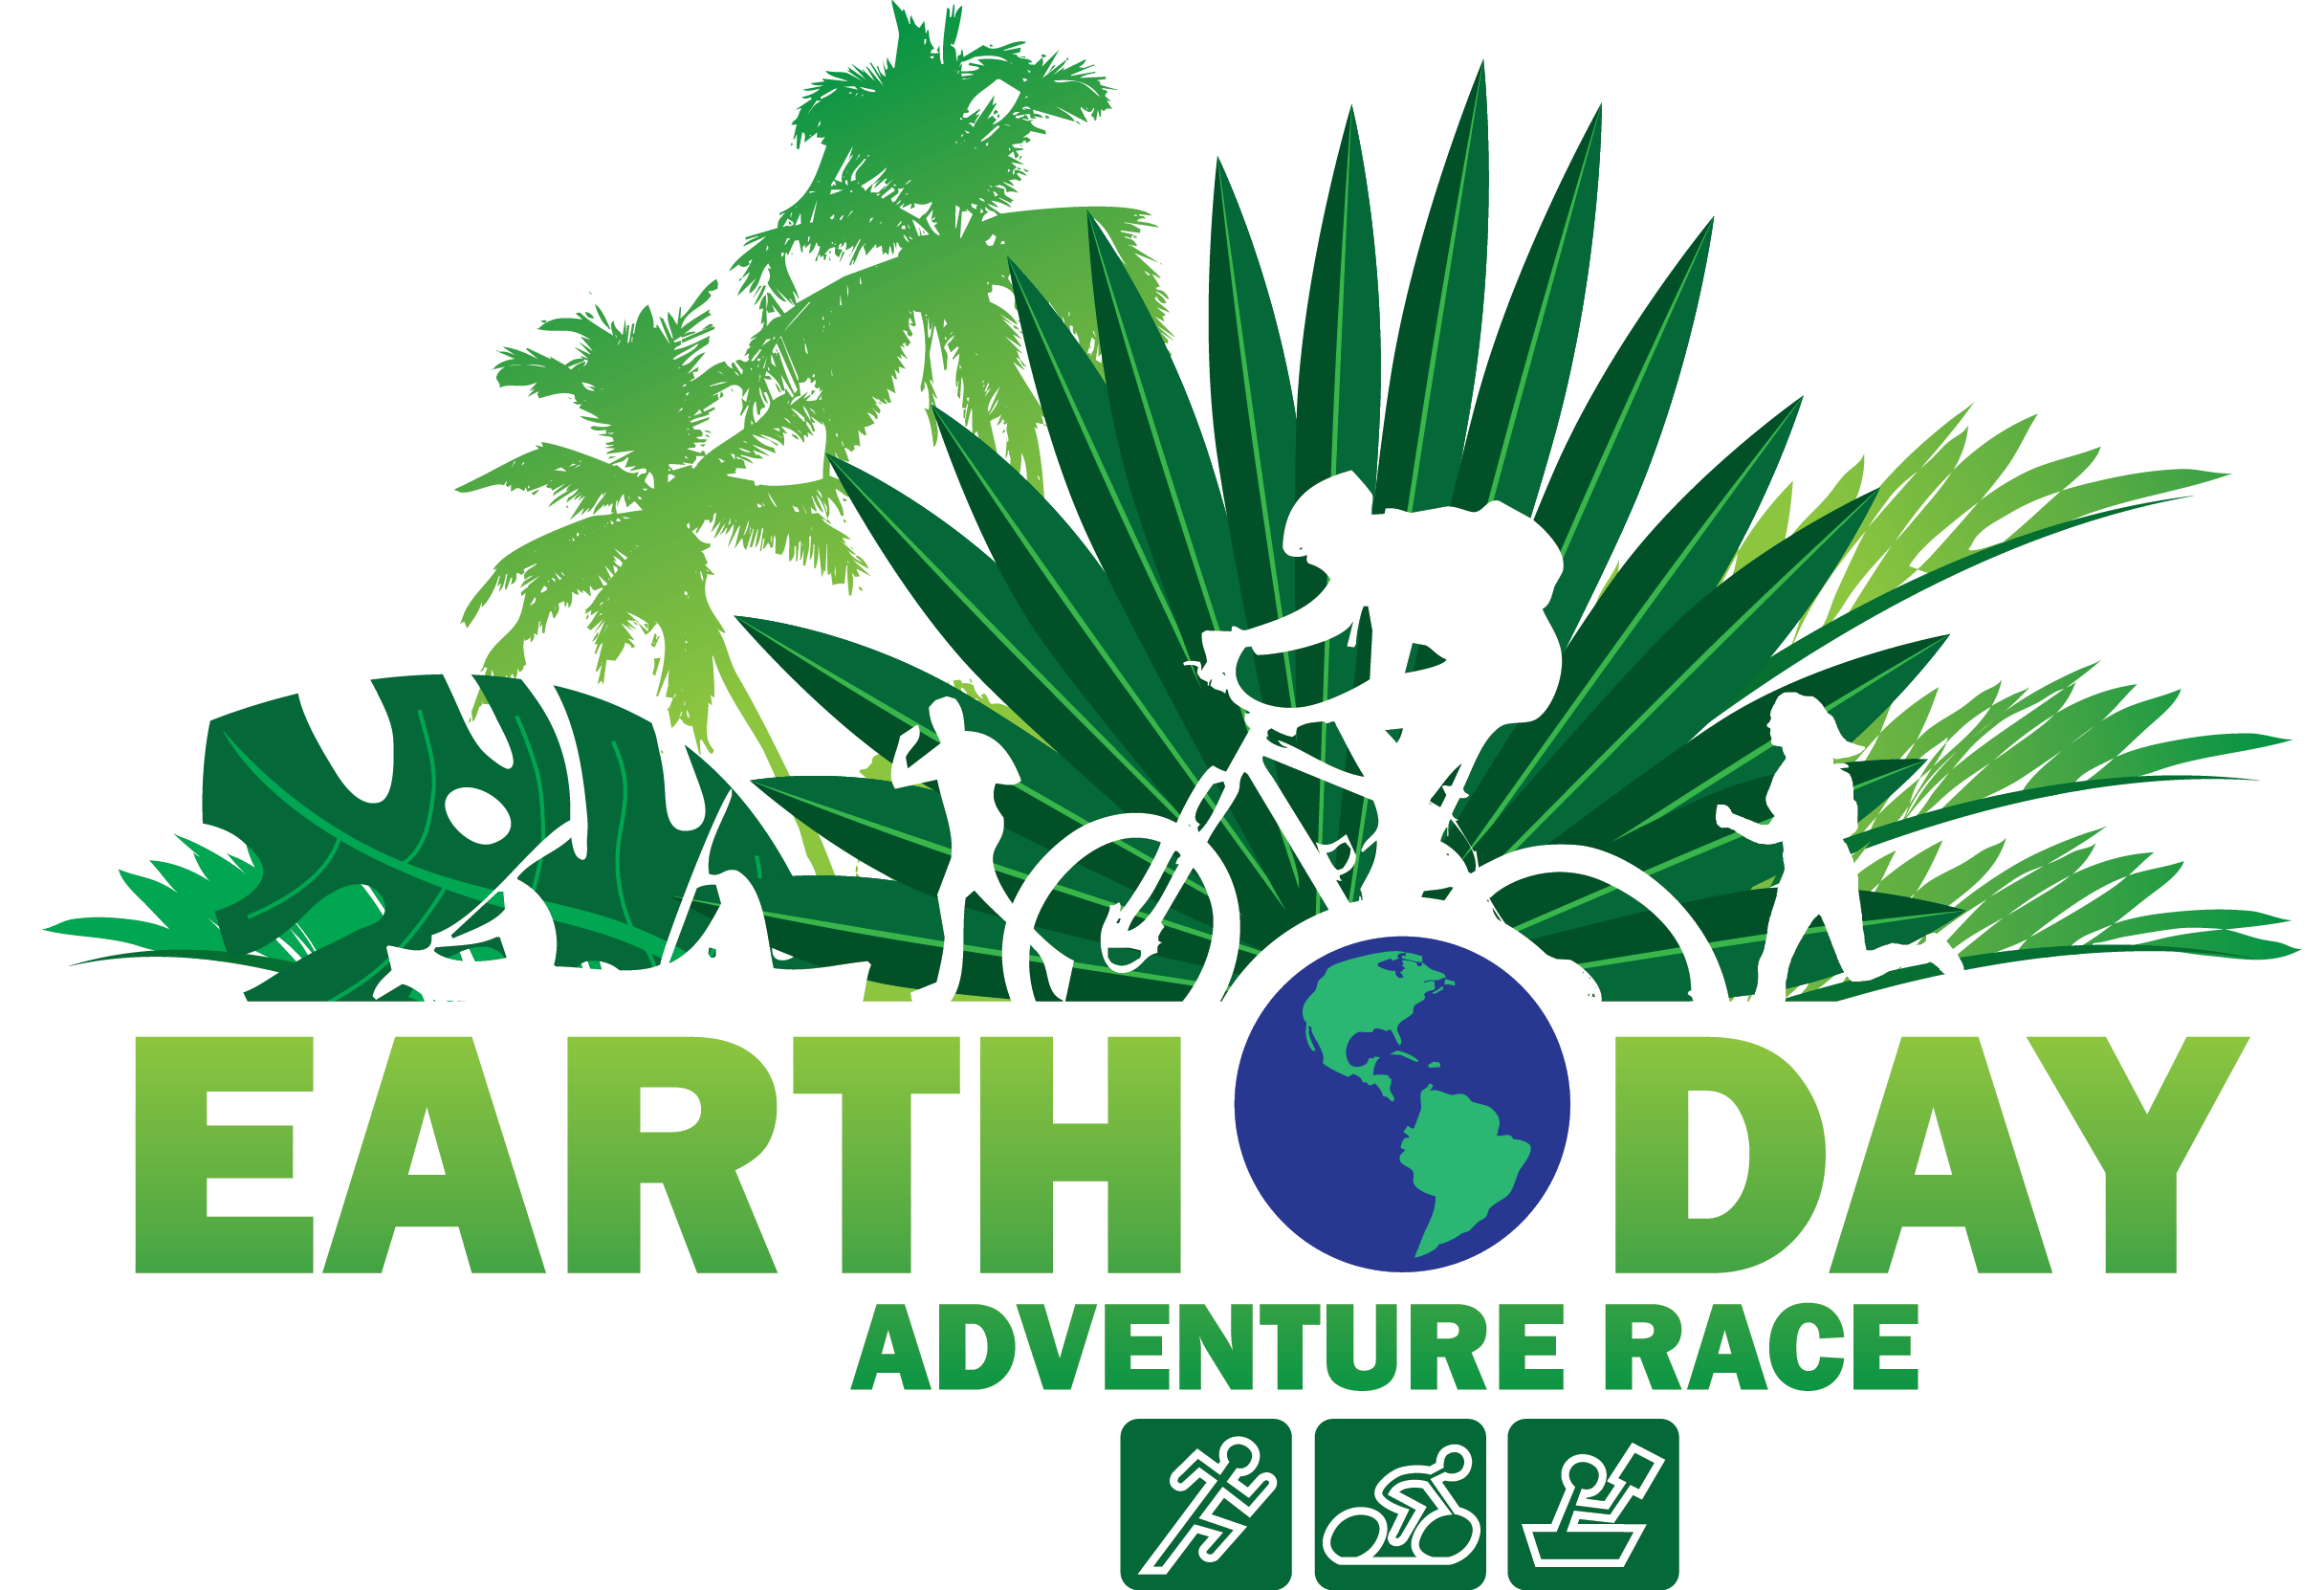 Google Earth Day Logo - The Earth Day AR (2018) Xtreme Adventures